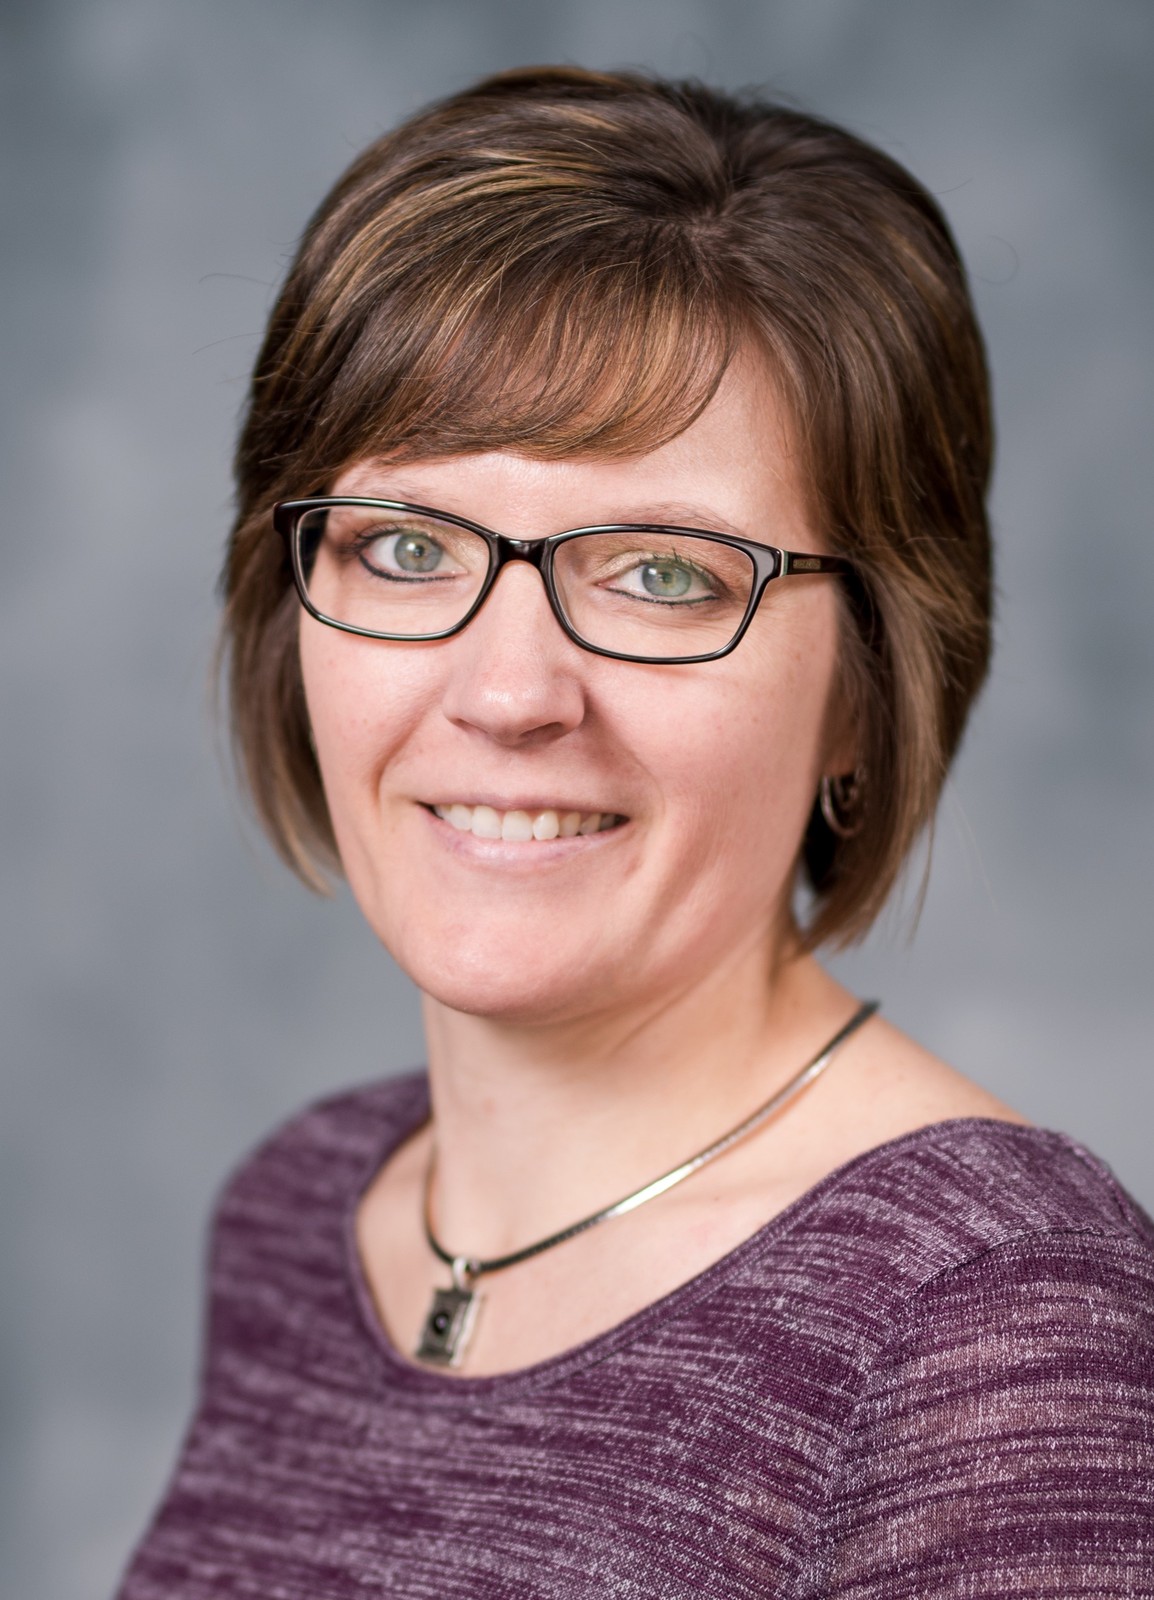 Career Coach Tanya Boettcher has been selected as the Wisconsin ACT College and Career Readiness Postsecondary Champion by ACT